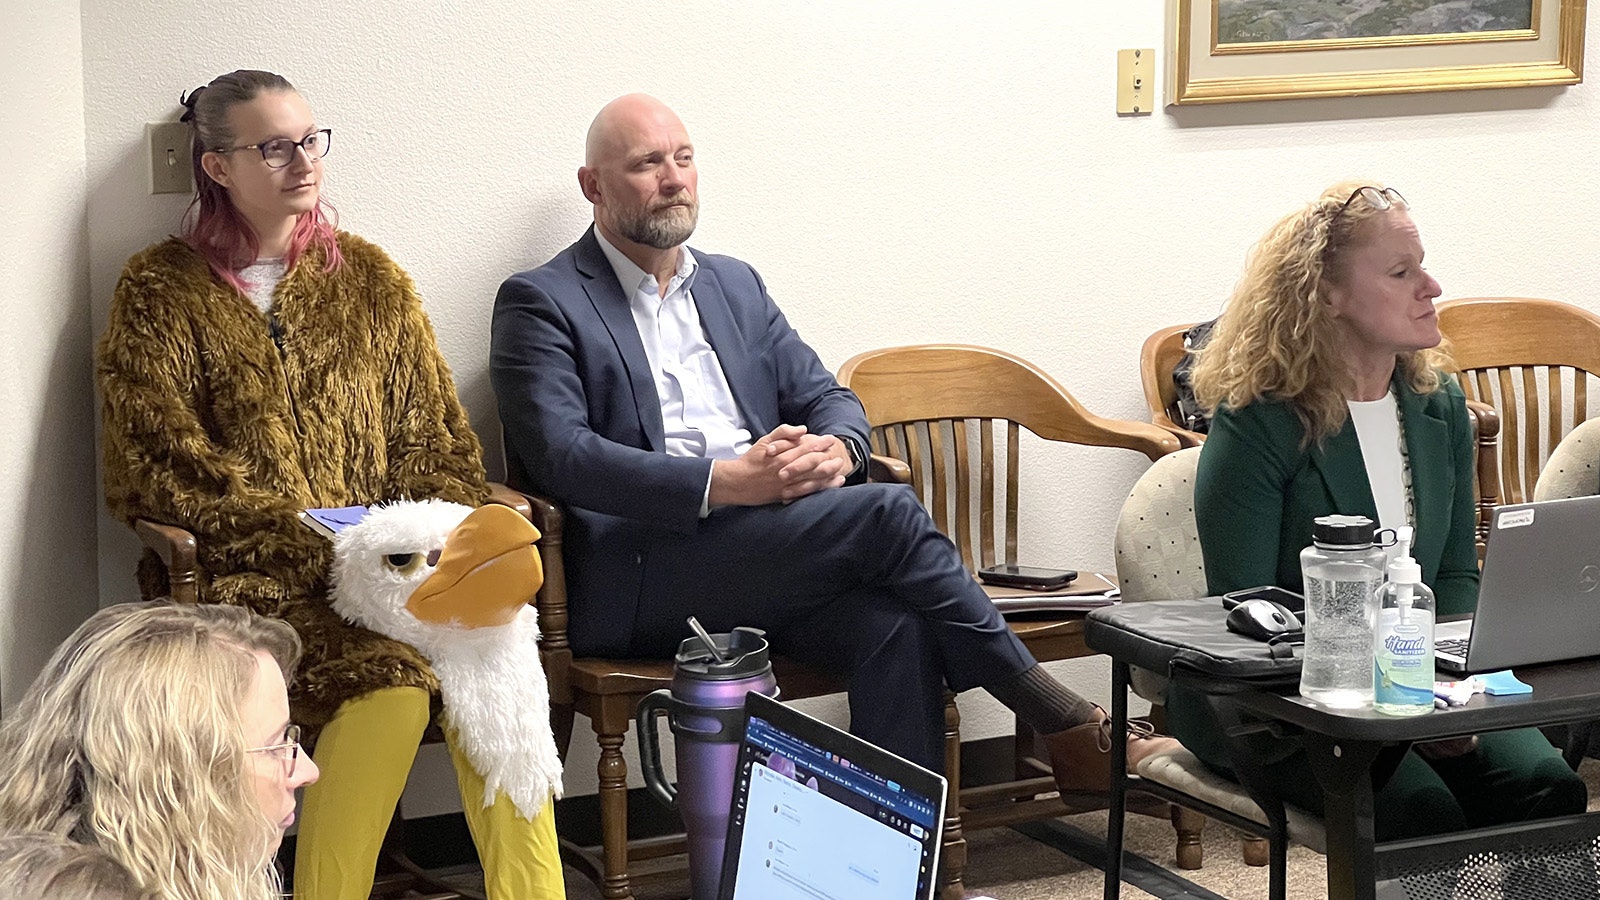 Maggie Imman, a University of Wyoming student, attended Thursday's Wyoming Public Service Commission meeting in Cheyenne dressed as a bald eagle to comment on the costs of electricity in the state and the toll wind turbines take on eagles.